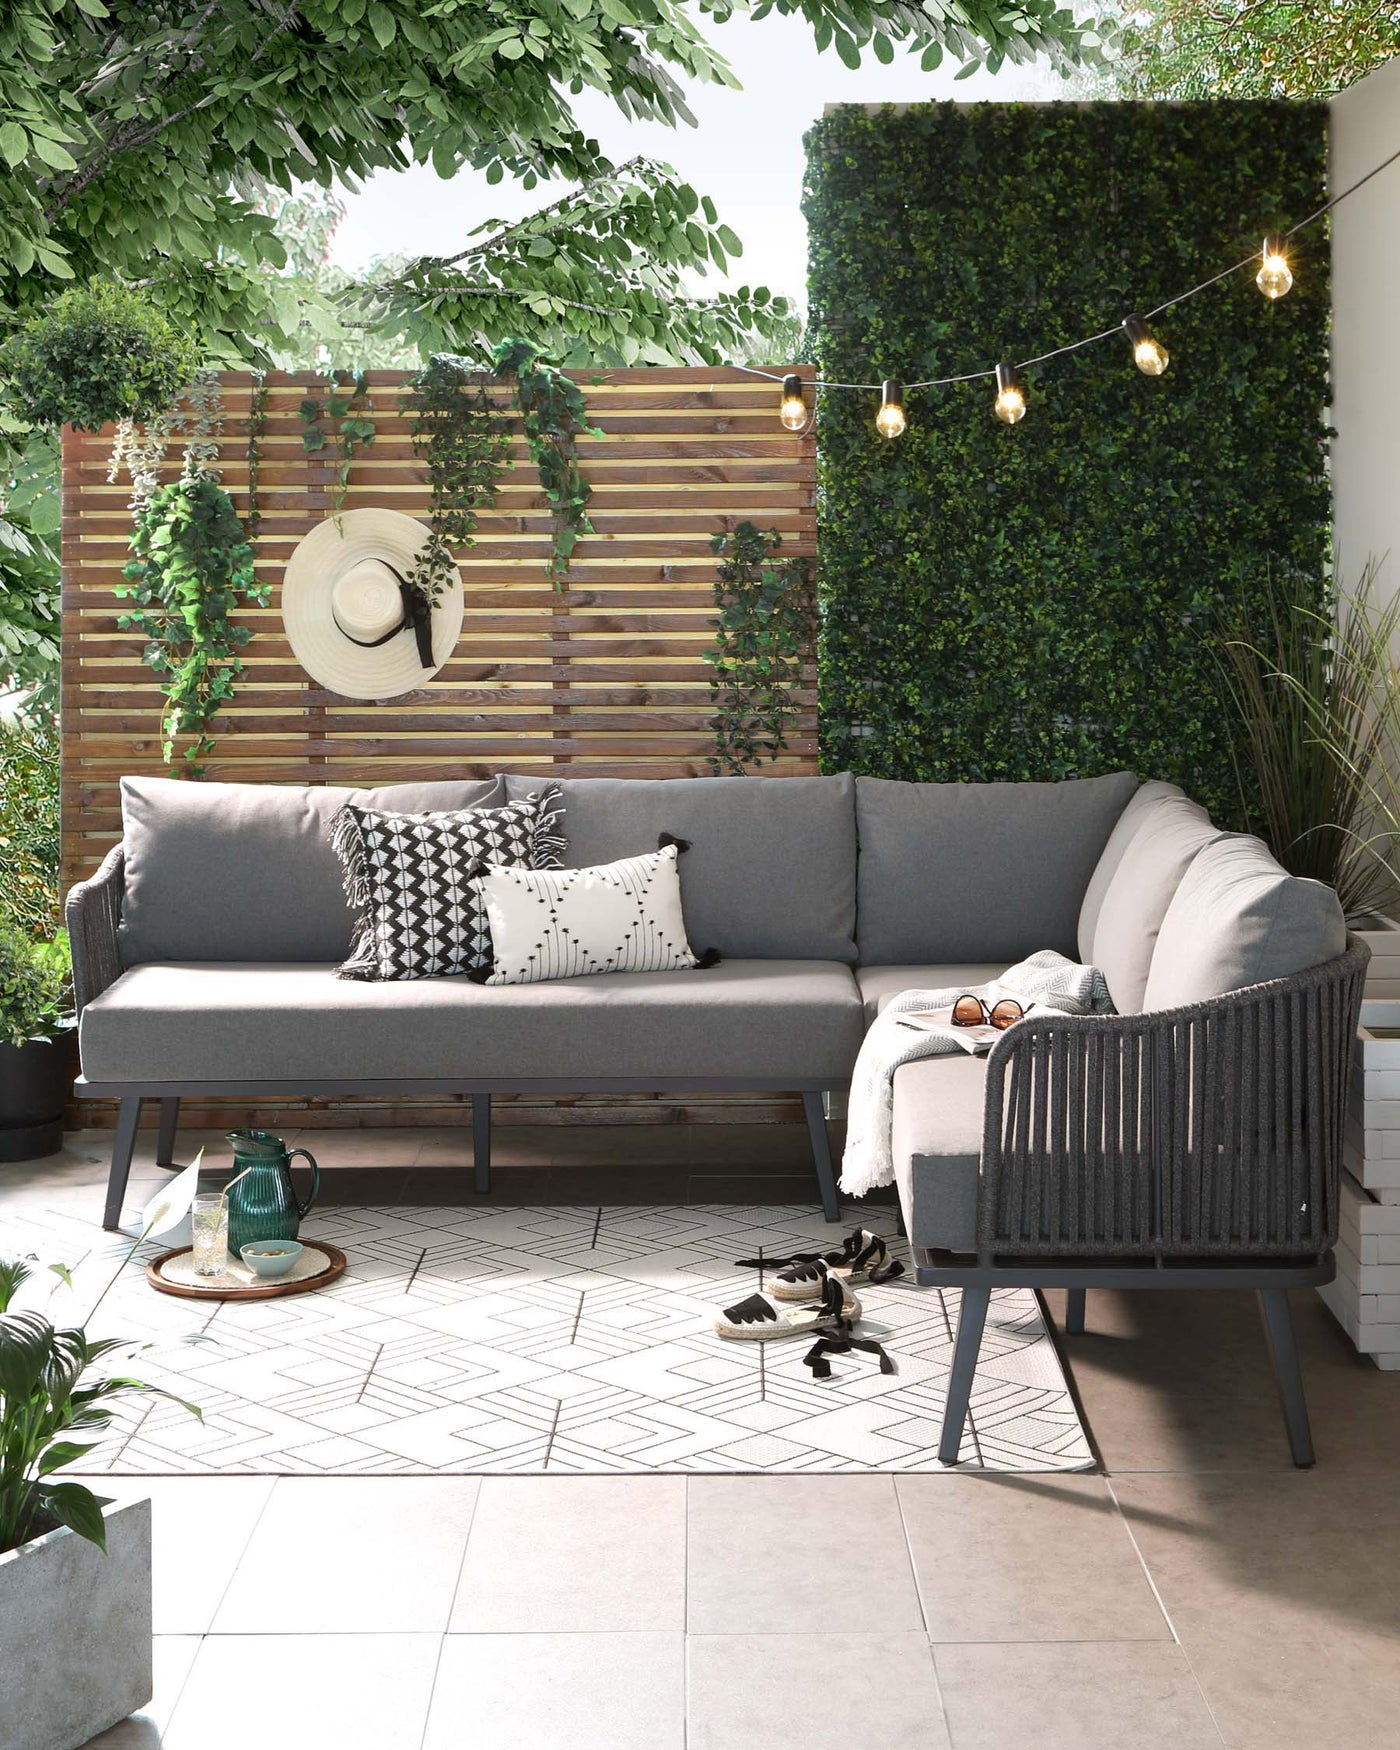 Modern outdoor corner sofa with grey cushions and throw pillows, accompanied by a matching armchair. There is a round wooden side table with a glass pitcher and two cups, set on a geometric-patterned tile floor. Decorative string lights hang above.